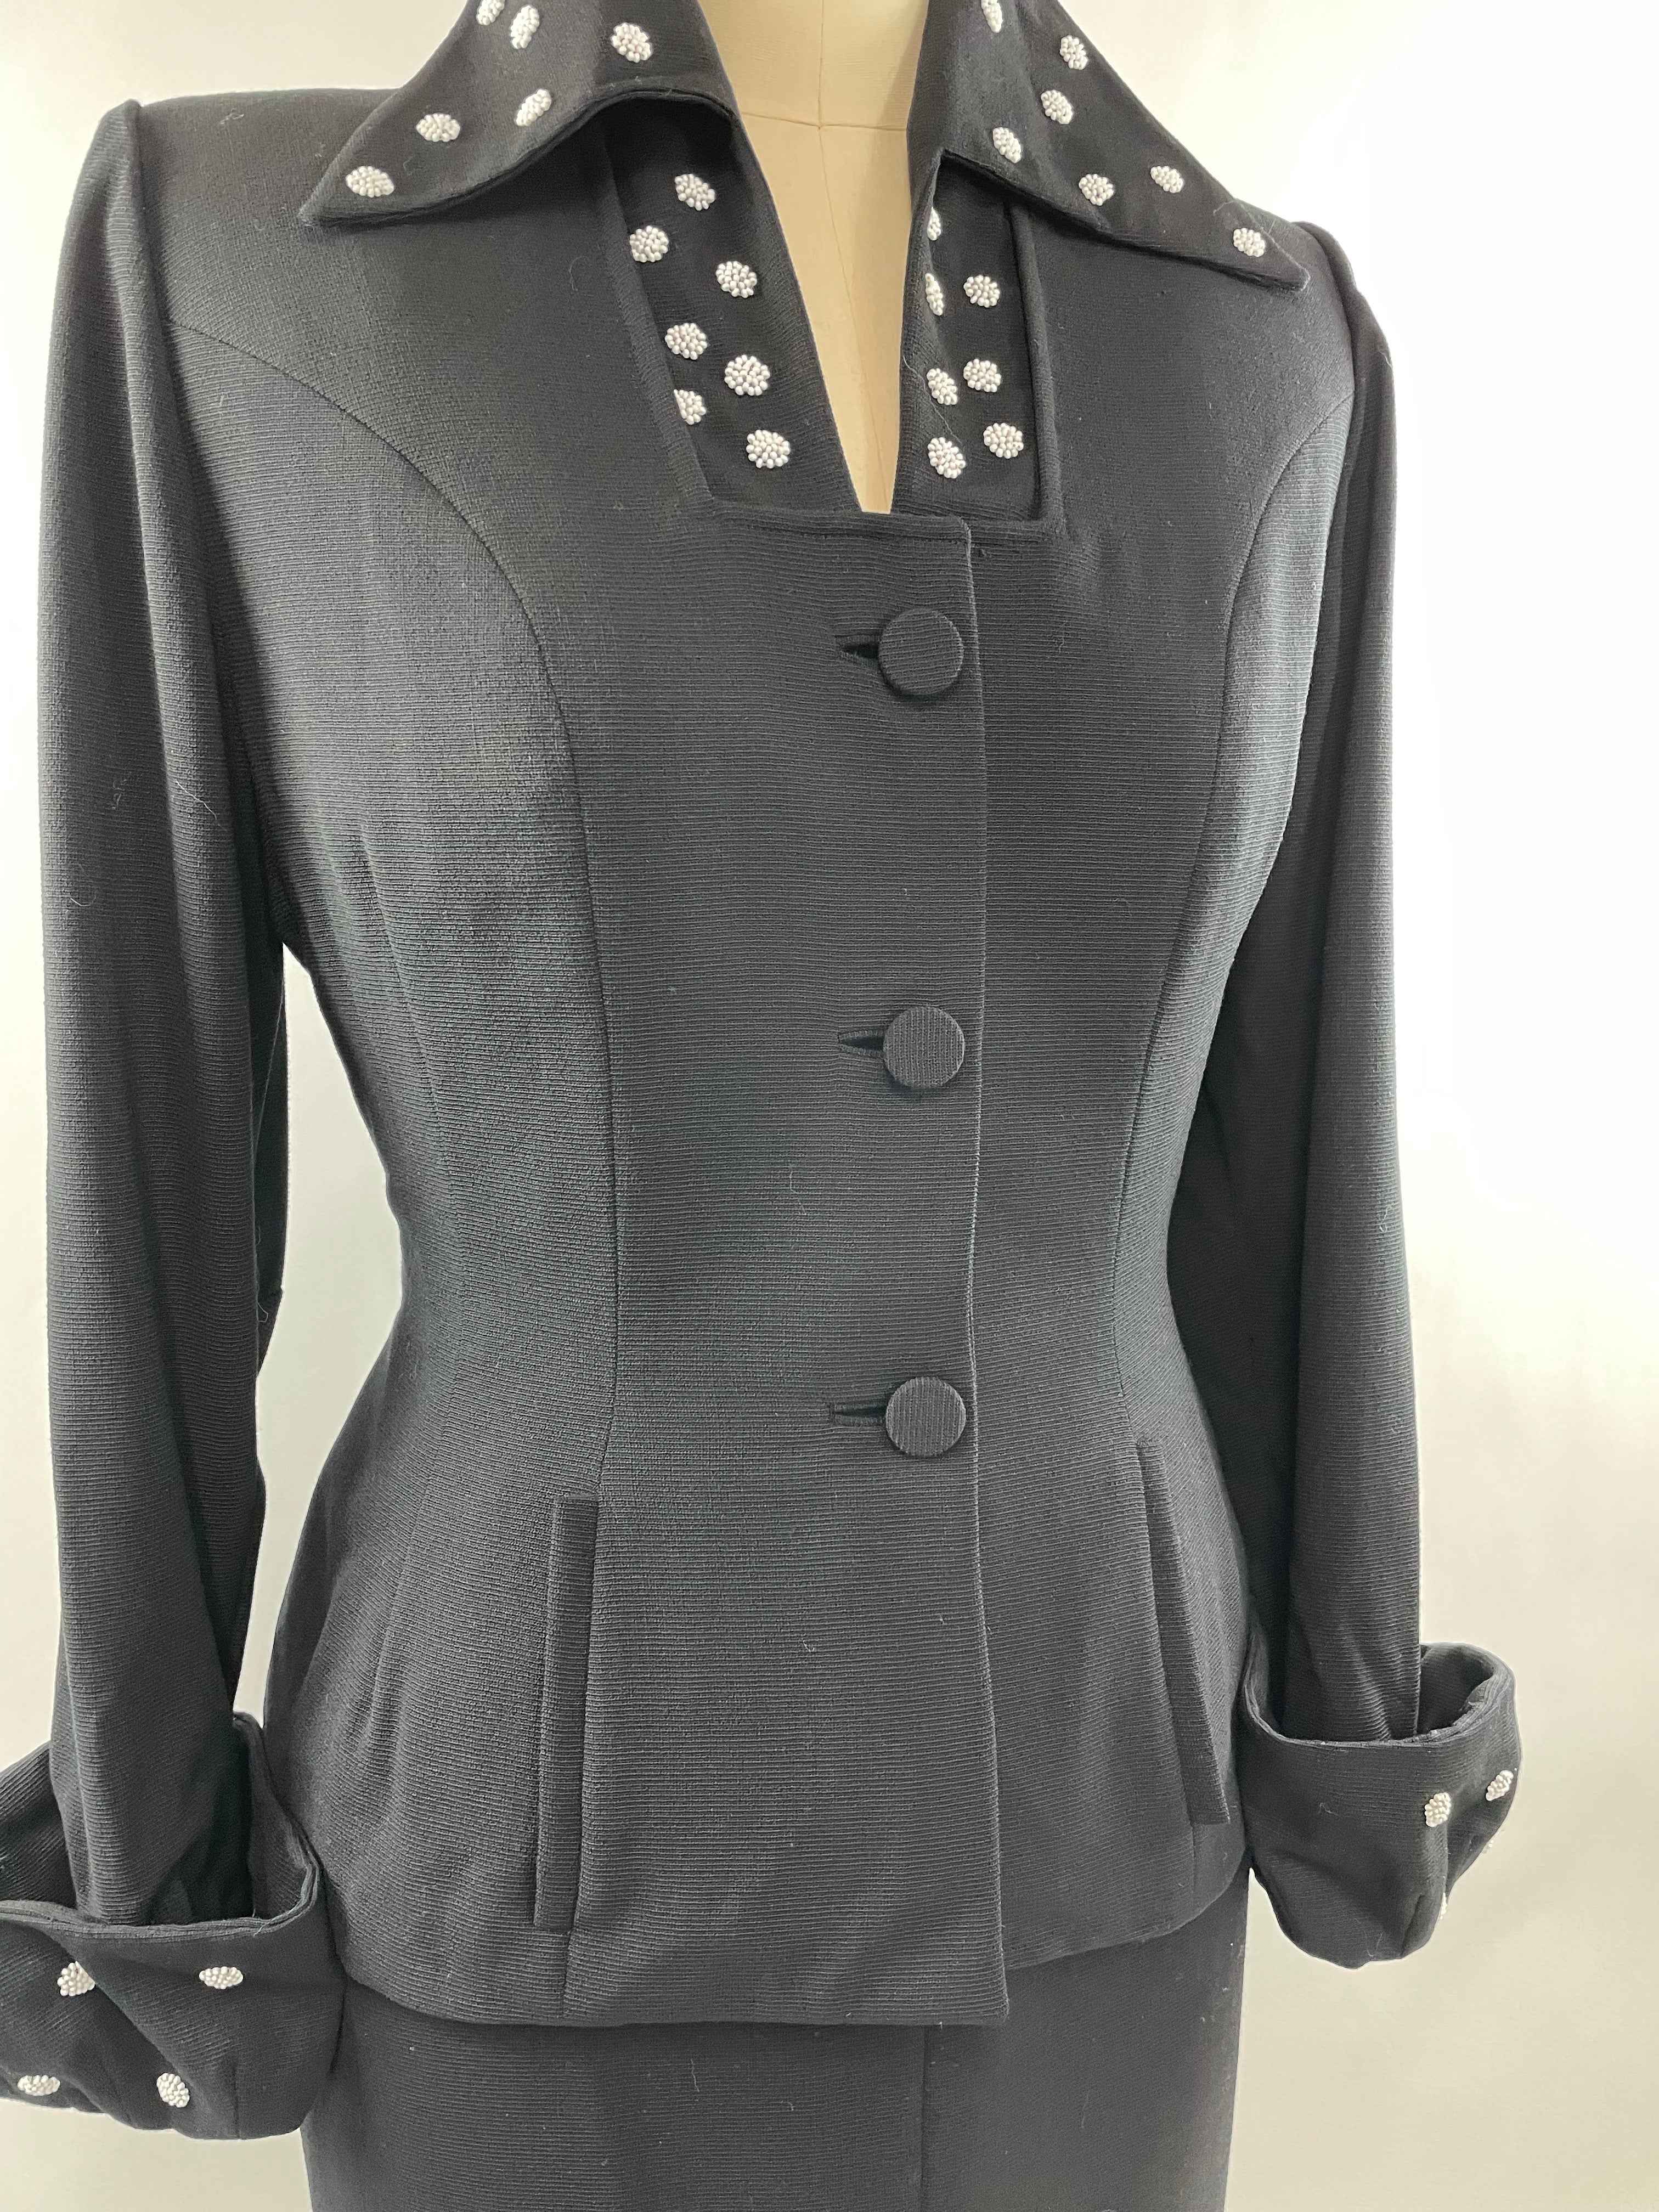 1950s Black Lilli Ann Skirt Suit with White Beading Size XL